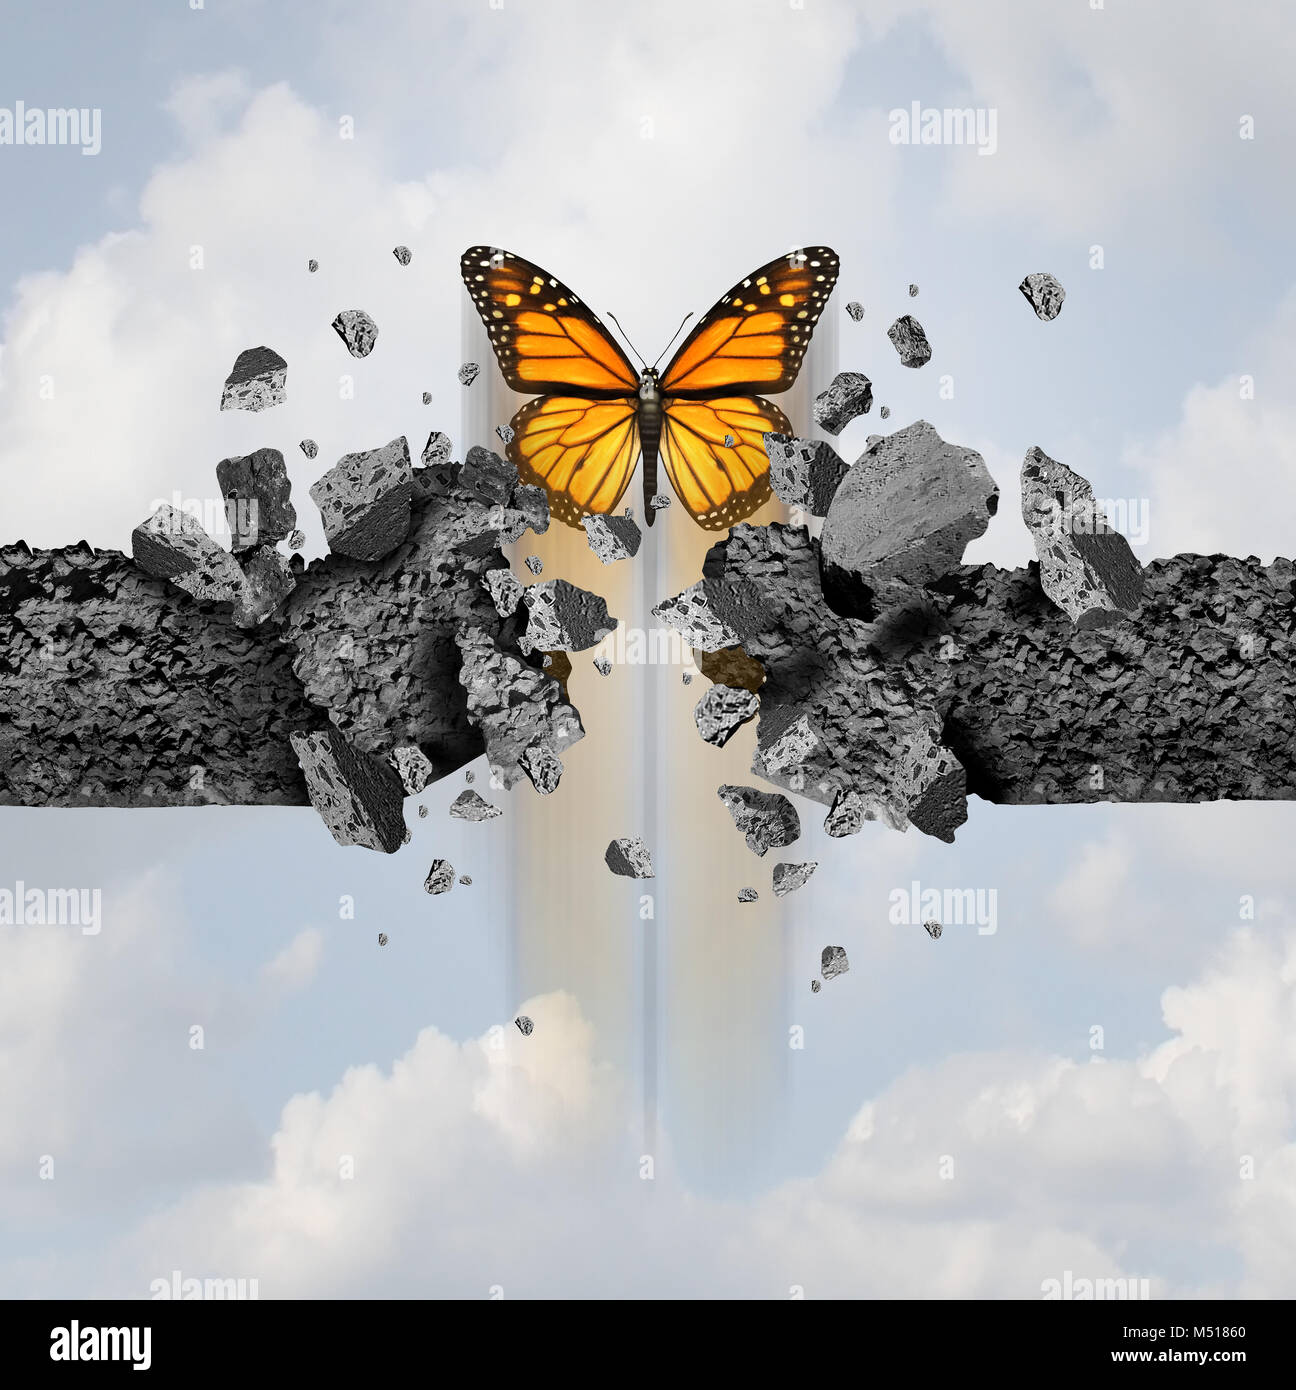 Idea of strength and unstoppable power concept as a butterfly breaking through a cement wall in a 3D illustration style. Stock Photo